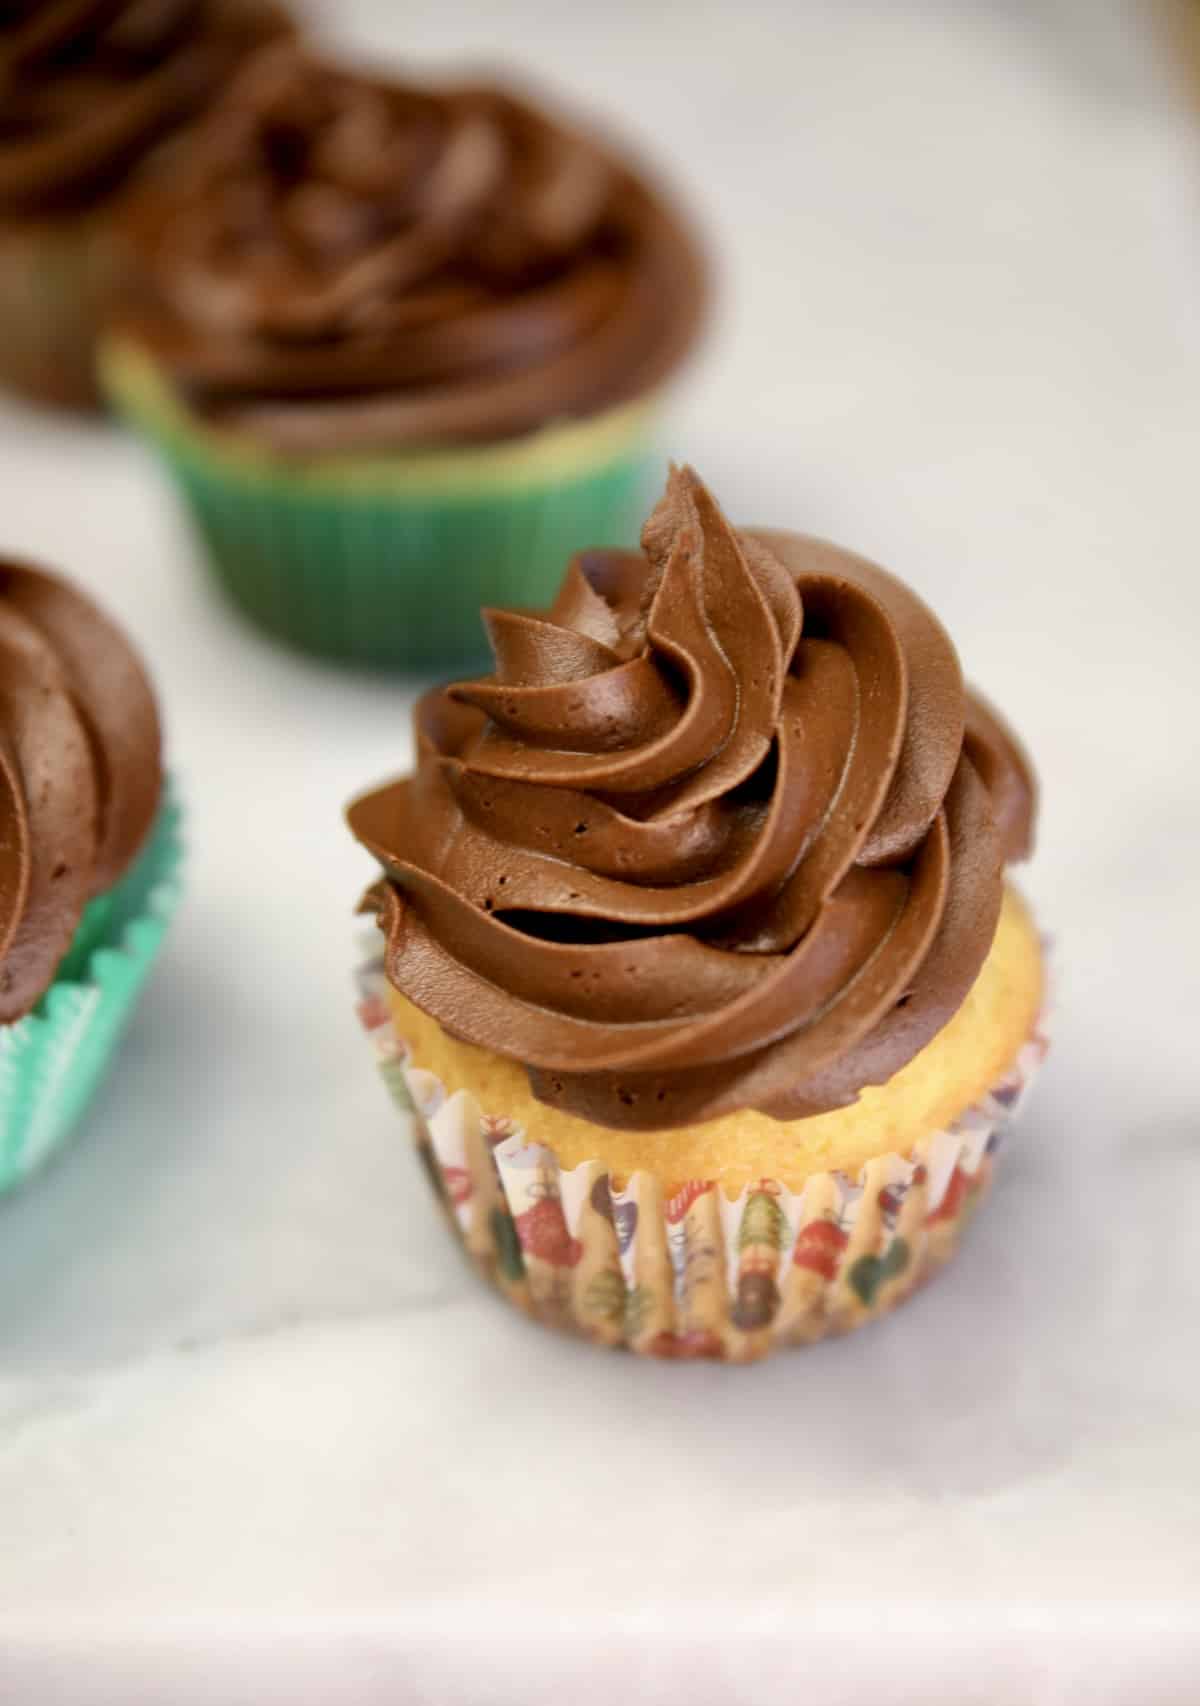 Chocolate frosted cupcakes.